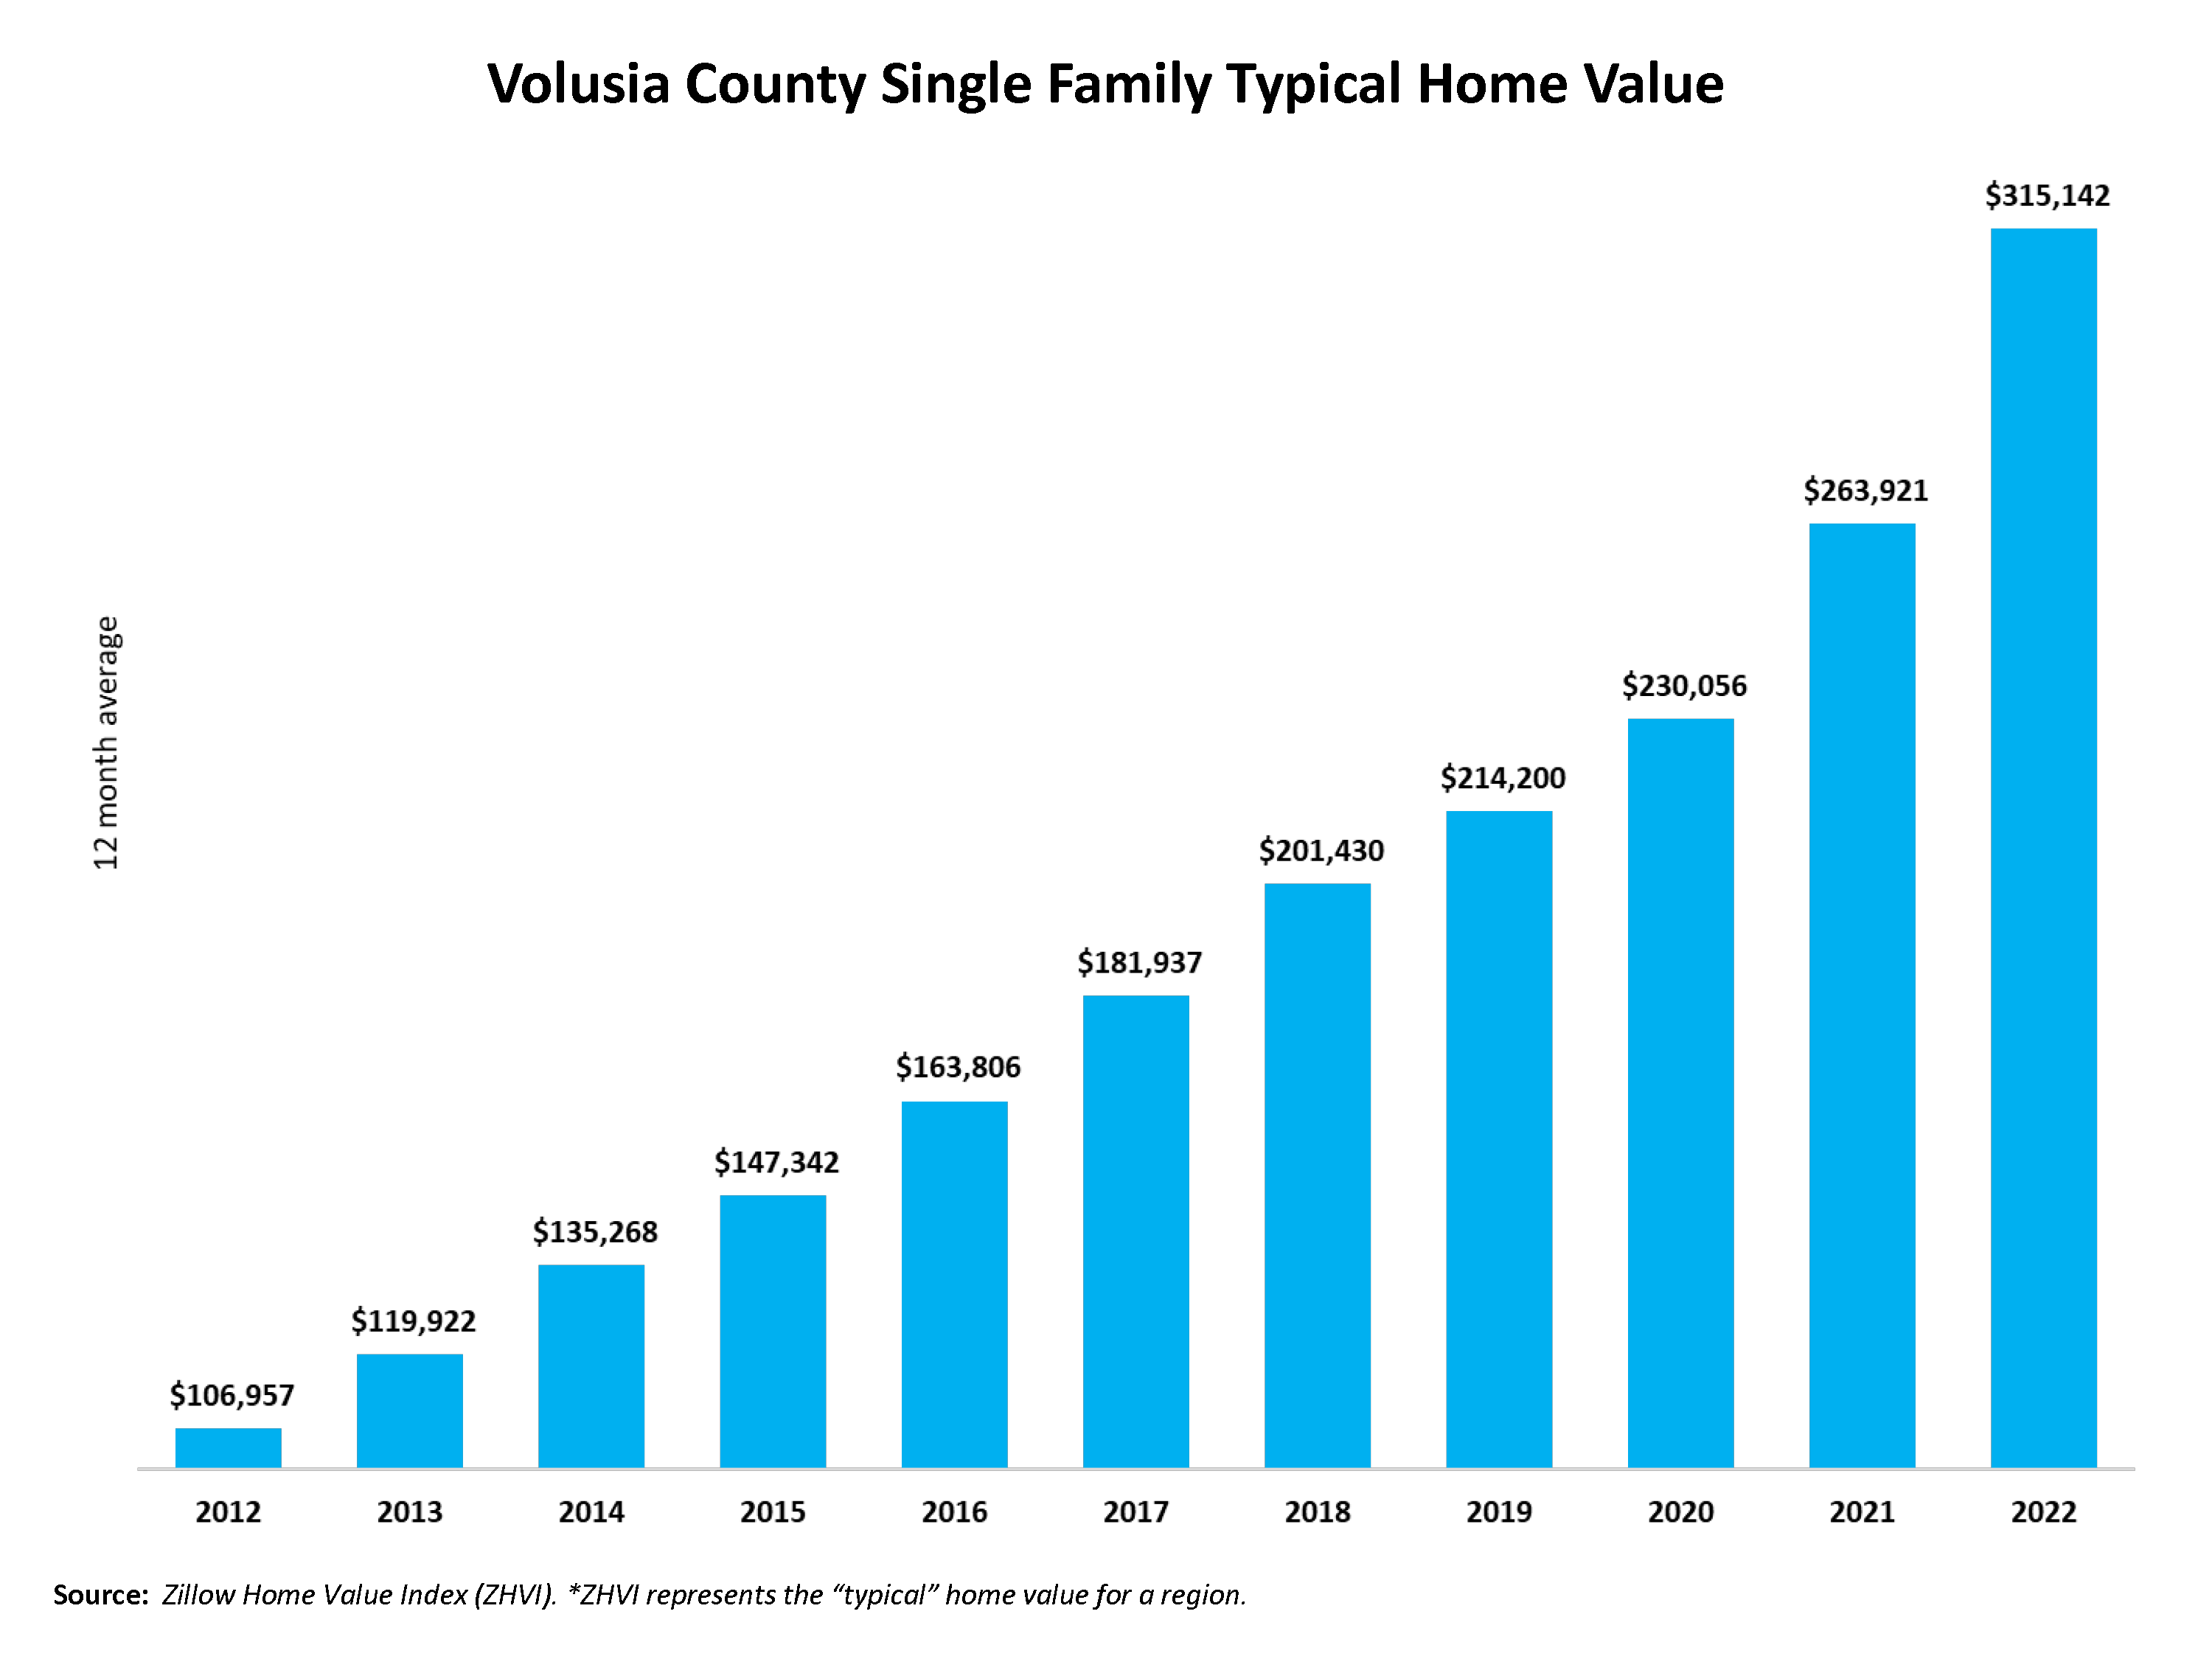 The chart is showing the steady increase of single family typical home values from 2011 where it was $117,360 and as of the end of 2021, the average home value was $264,868. From 2020 to 2021, the average single family home value increased 18.3%.